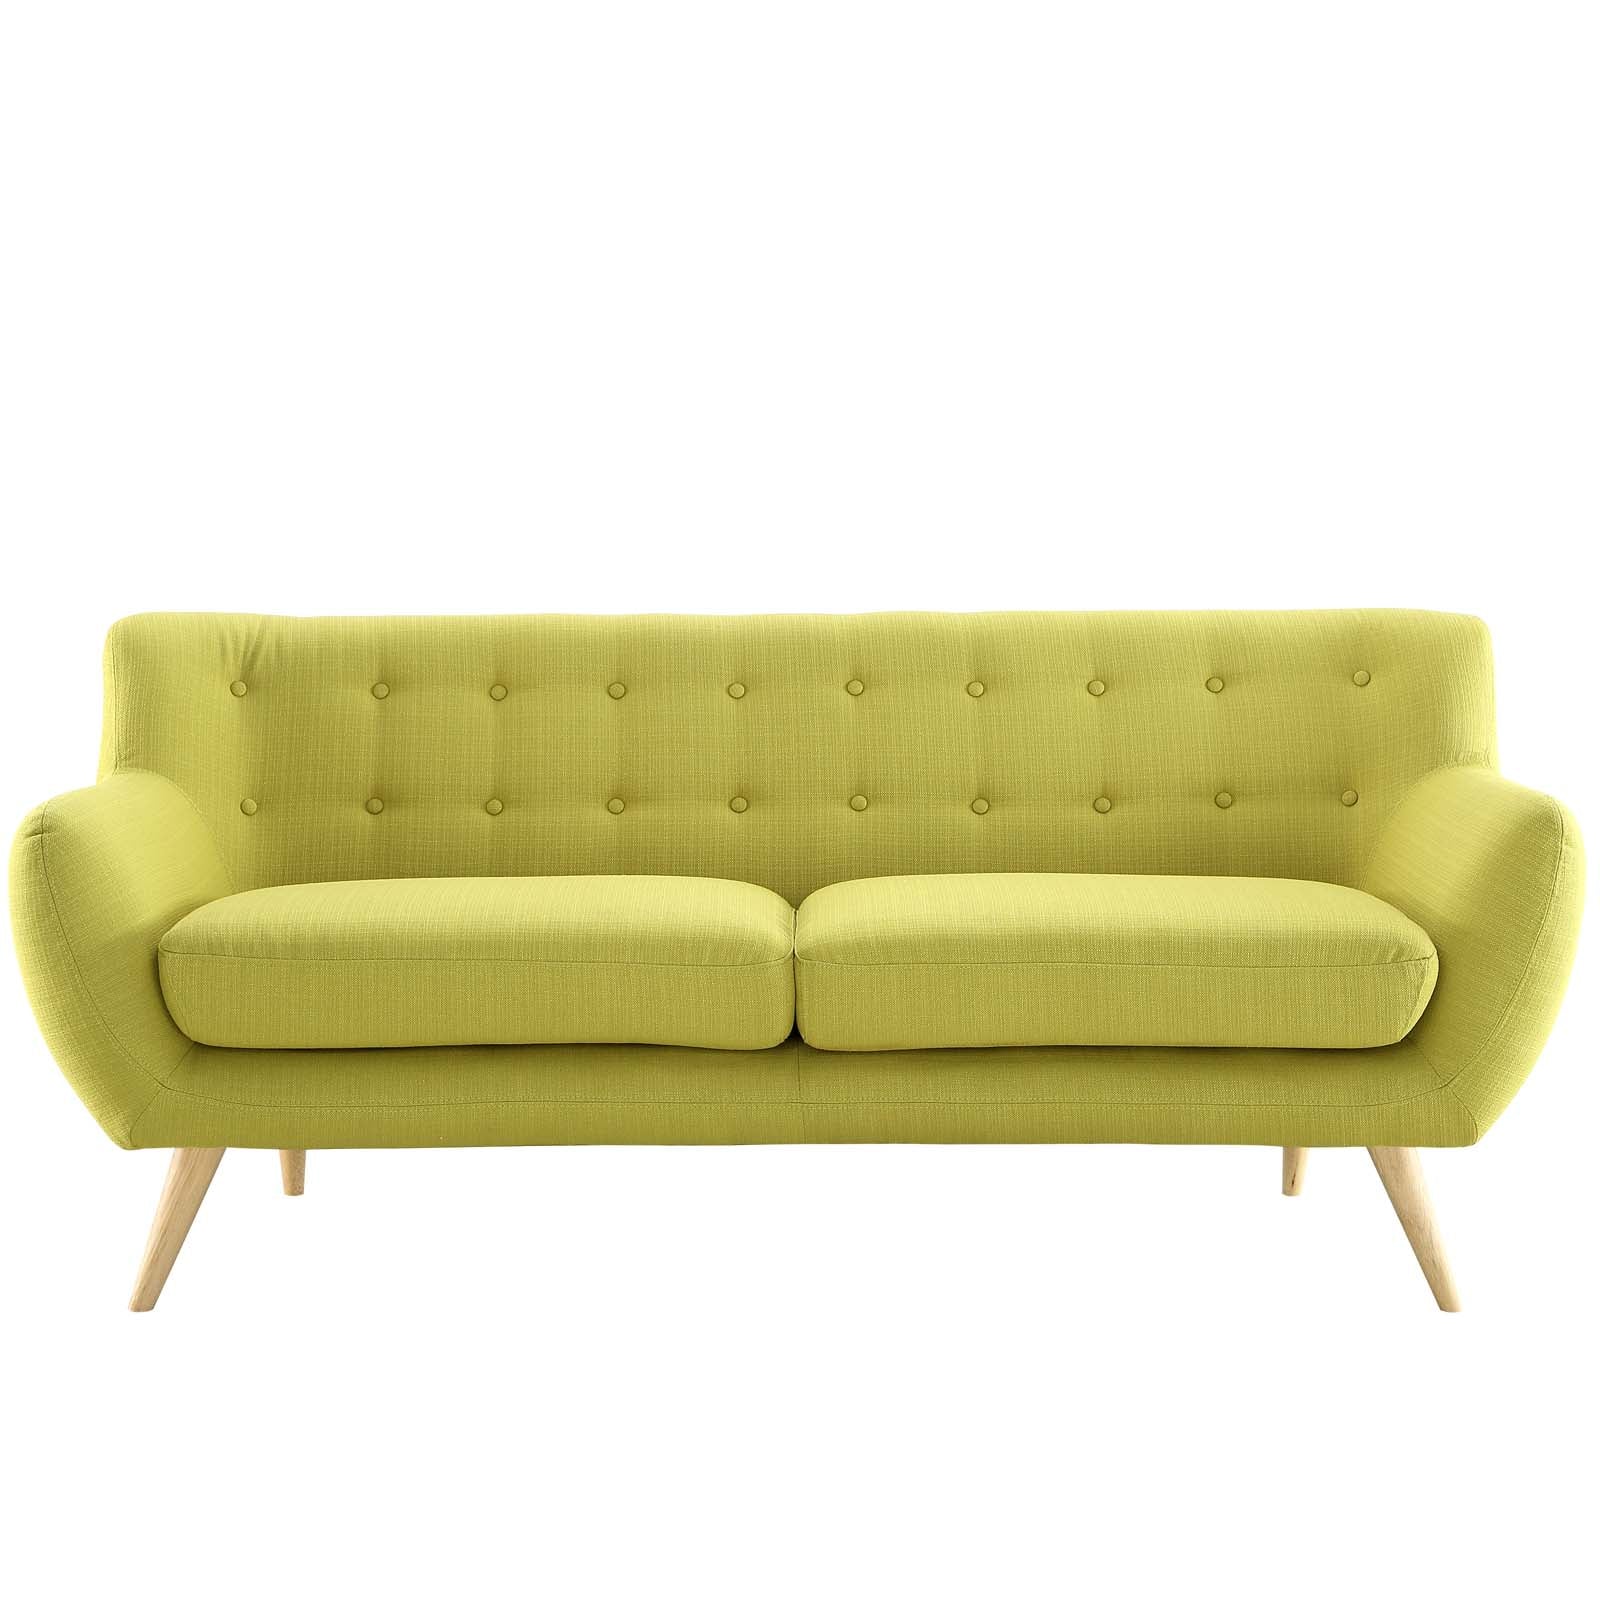 Modway Sofas & Couches - Remark Upholstered Fabric Sofa Wheatgrass